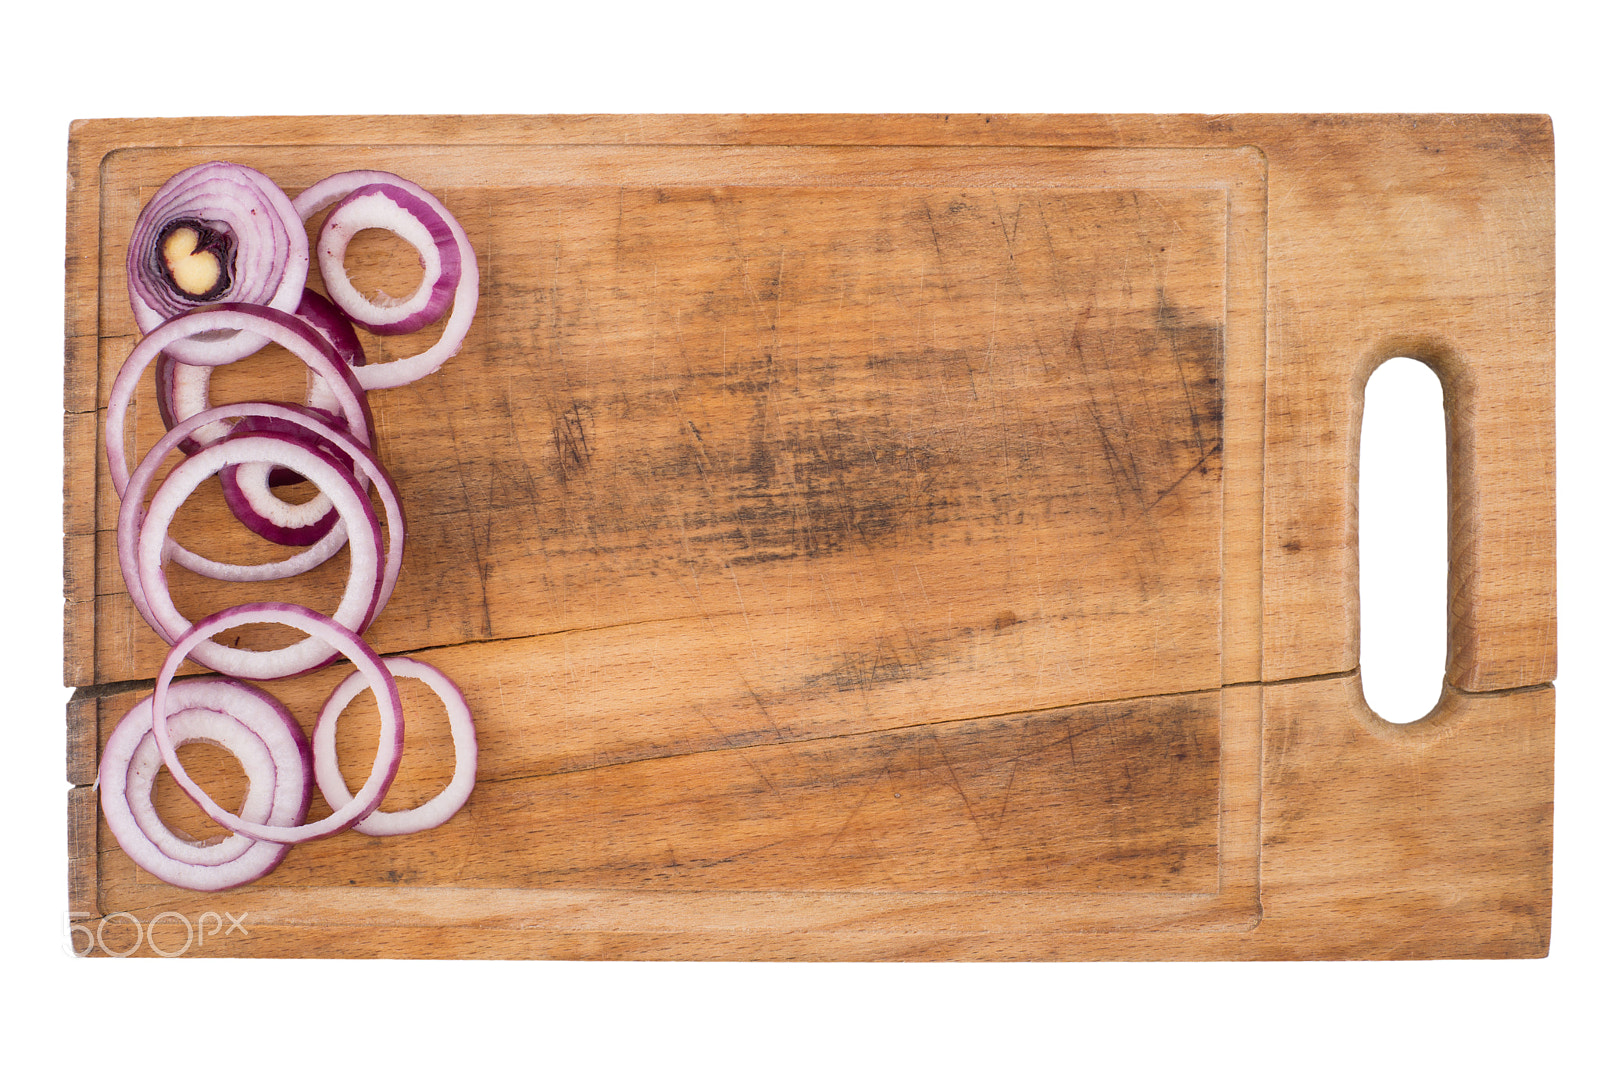 Sony a99 II sample photo. Sliced onion rings on a cutting board. photography